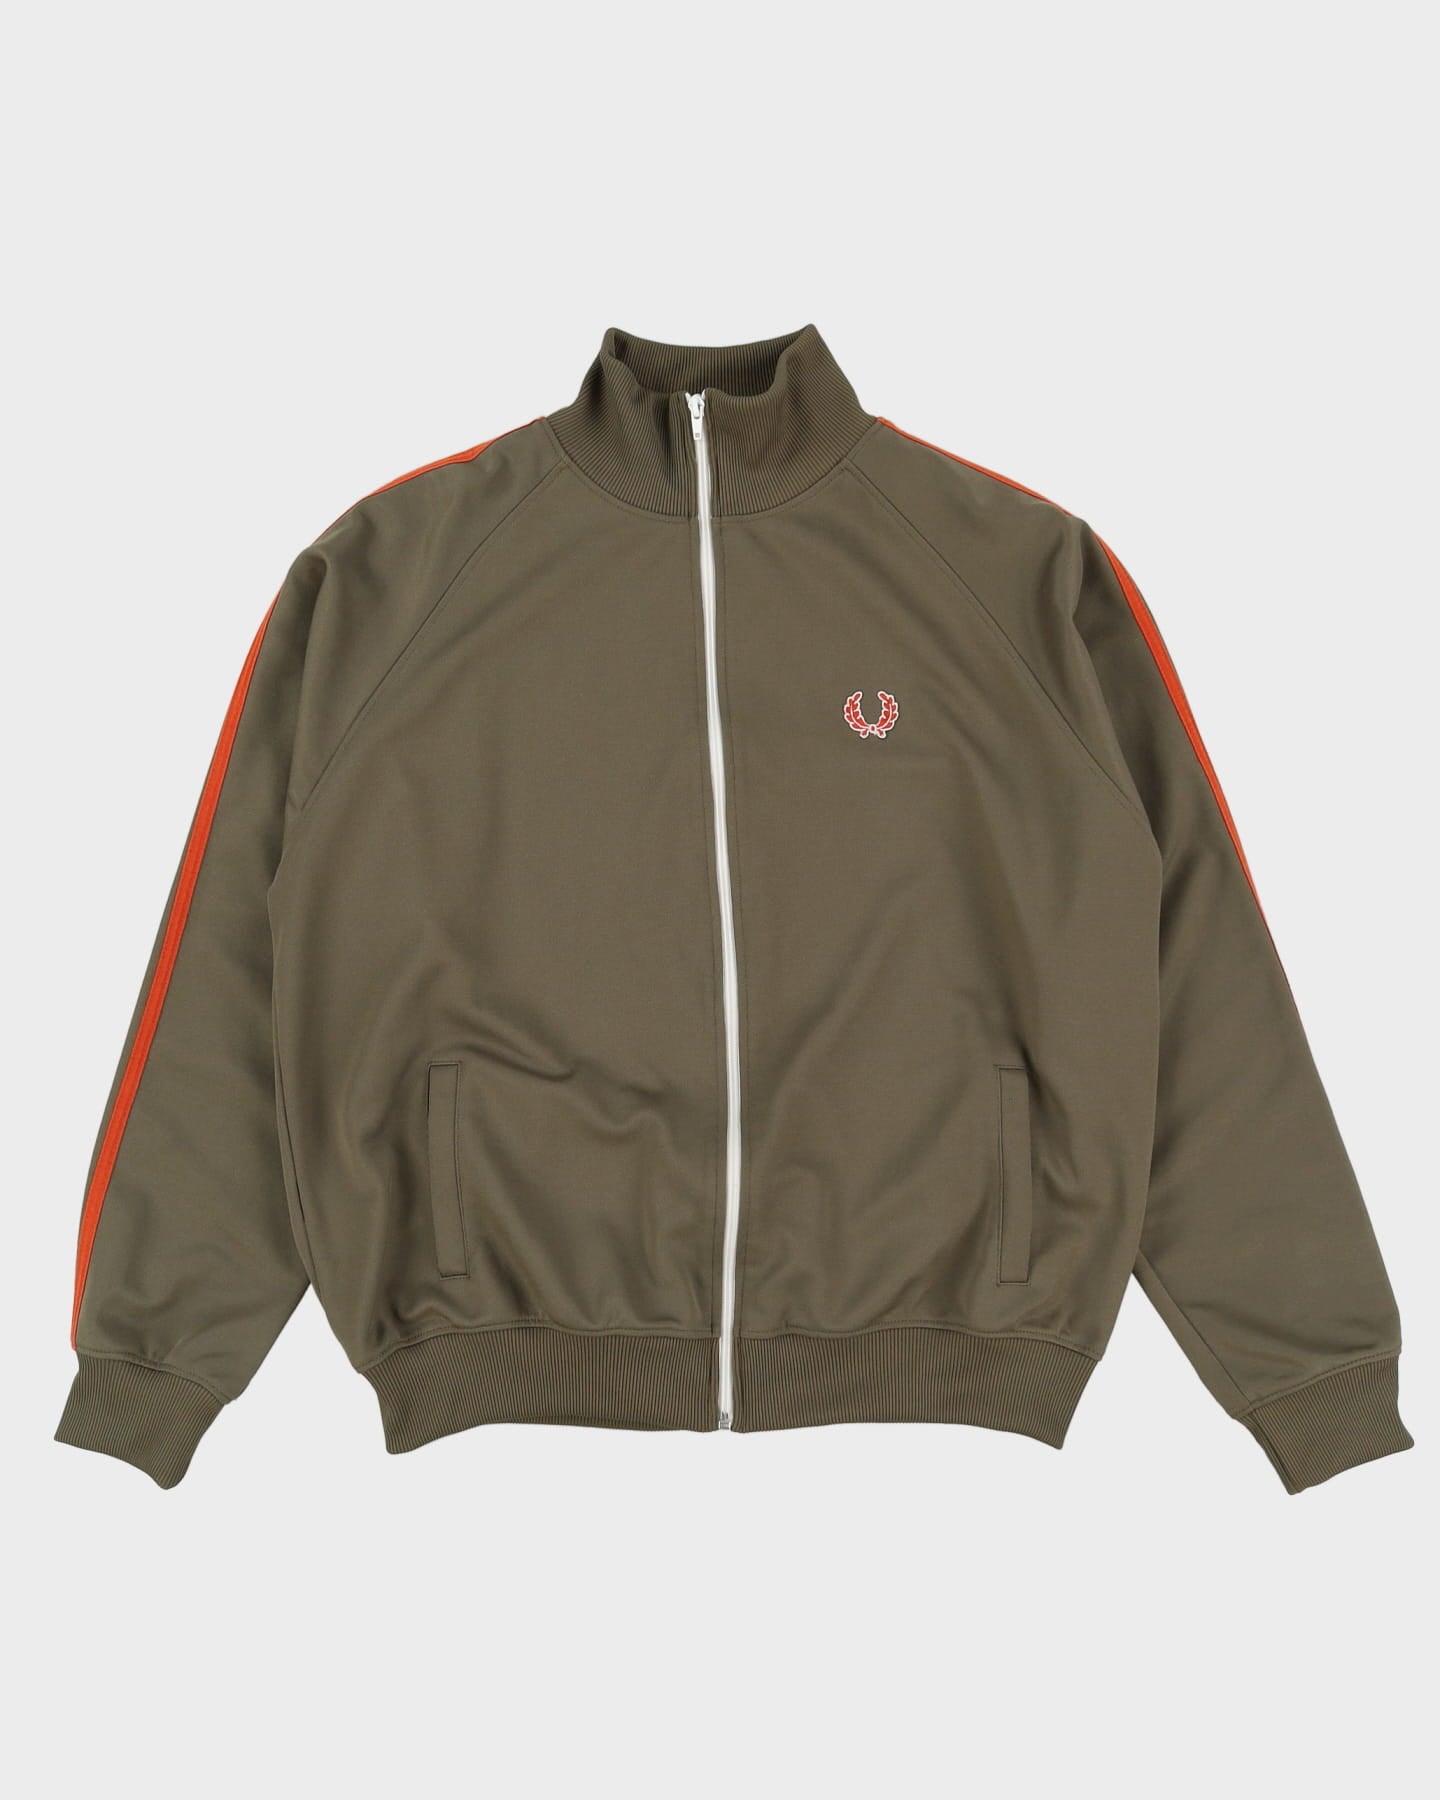 Vintage 90s Fred Perry Green / Orange Striped Track Jacket - XL